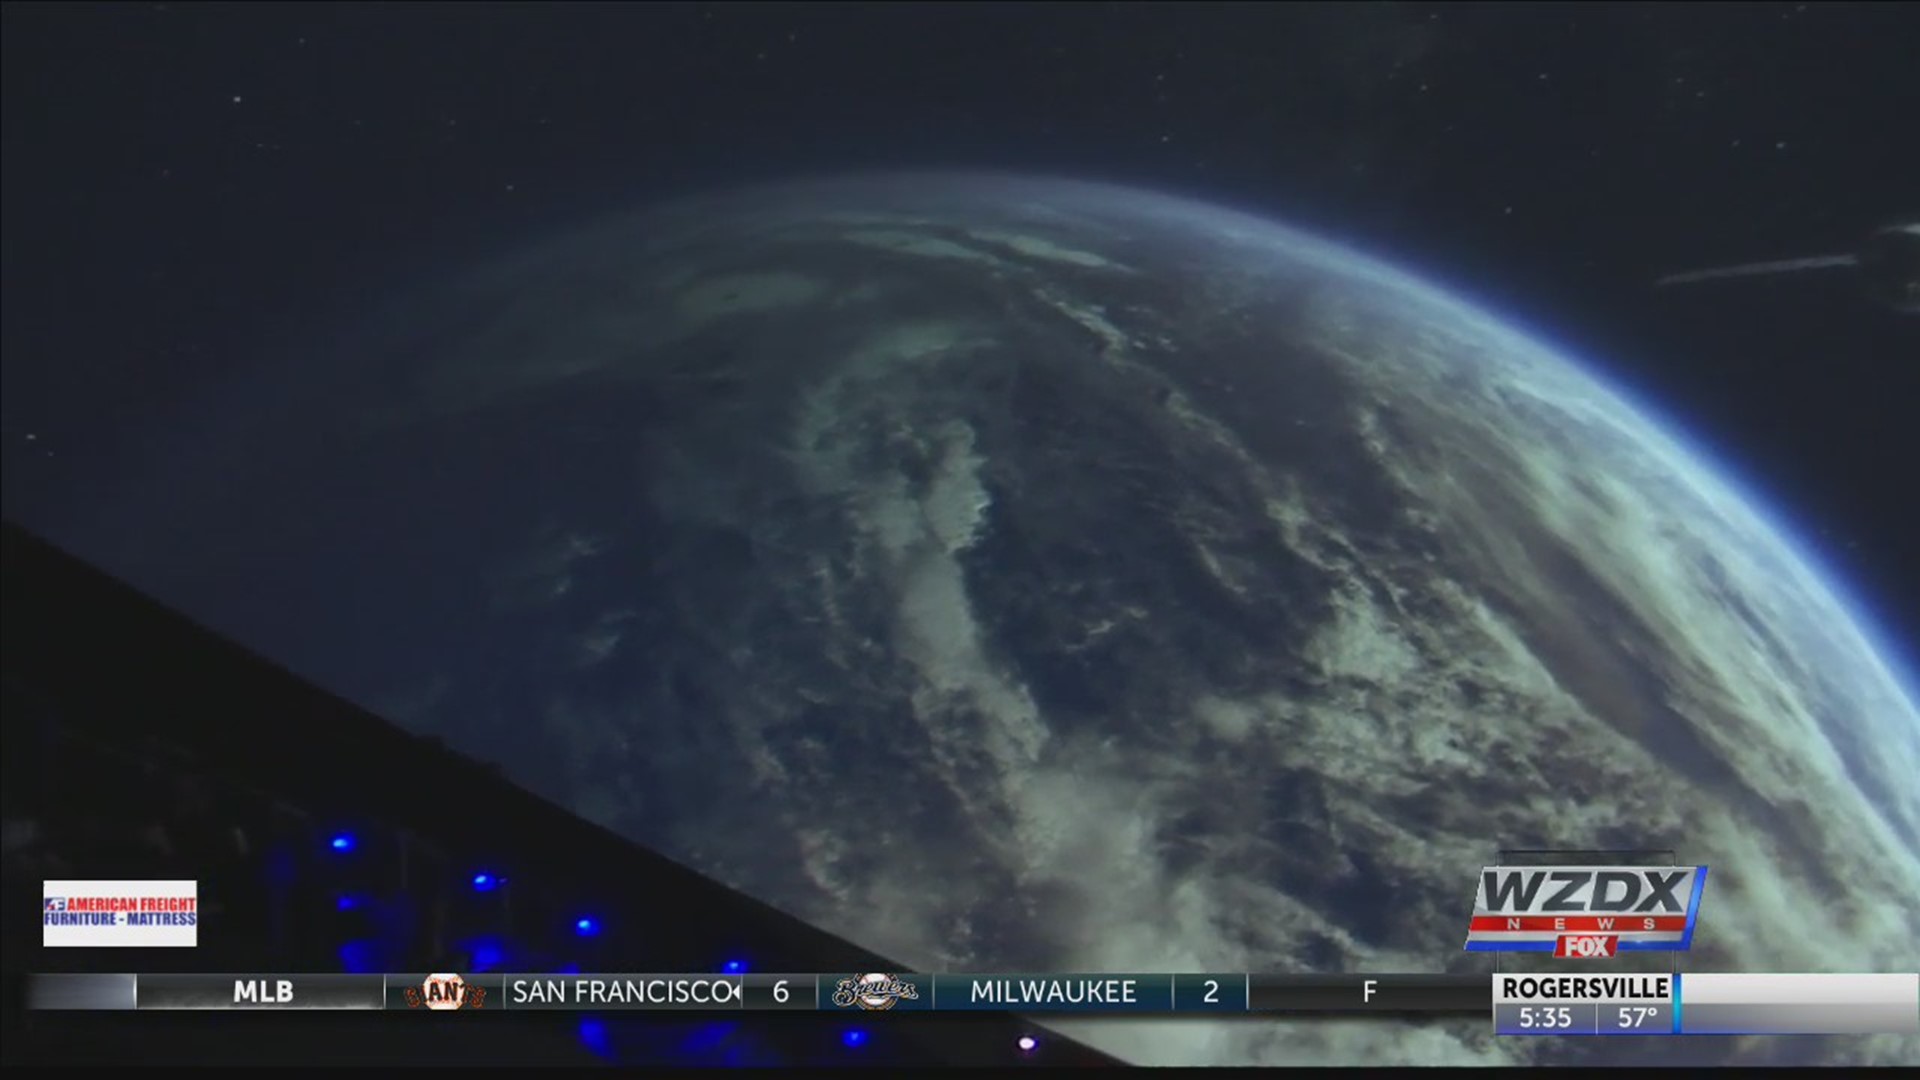 The Intuitive Planetarium was unveiled Thursday afternoon at the US Space and Rocket Center.